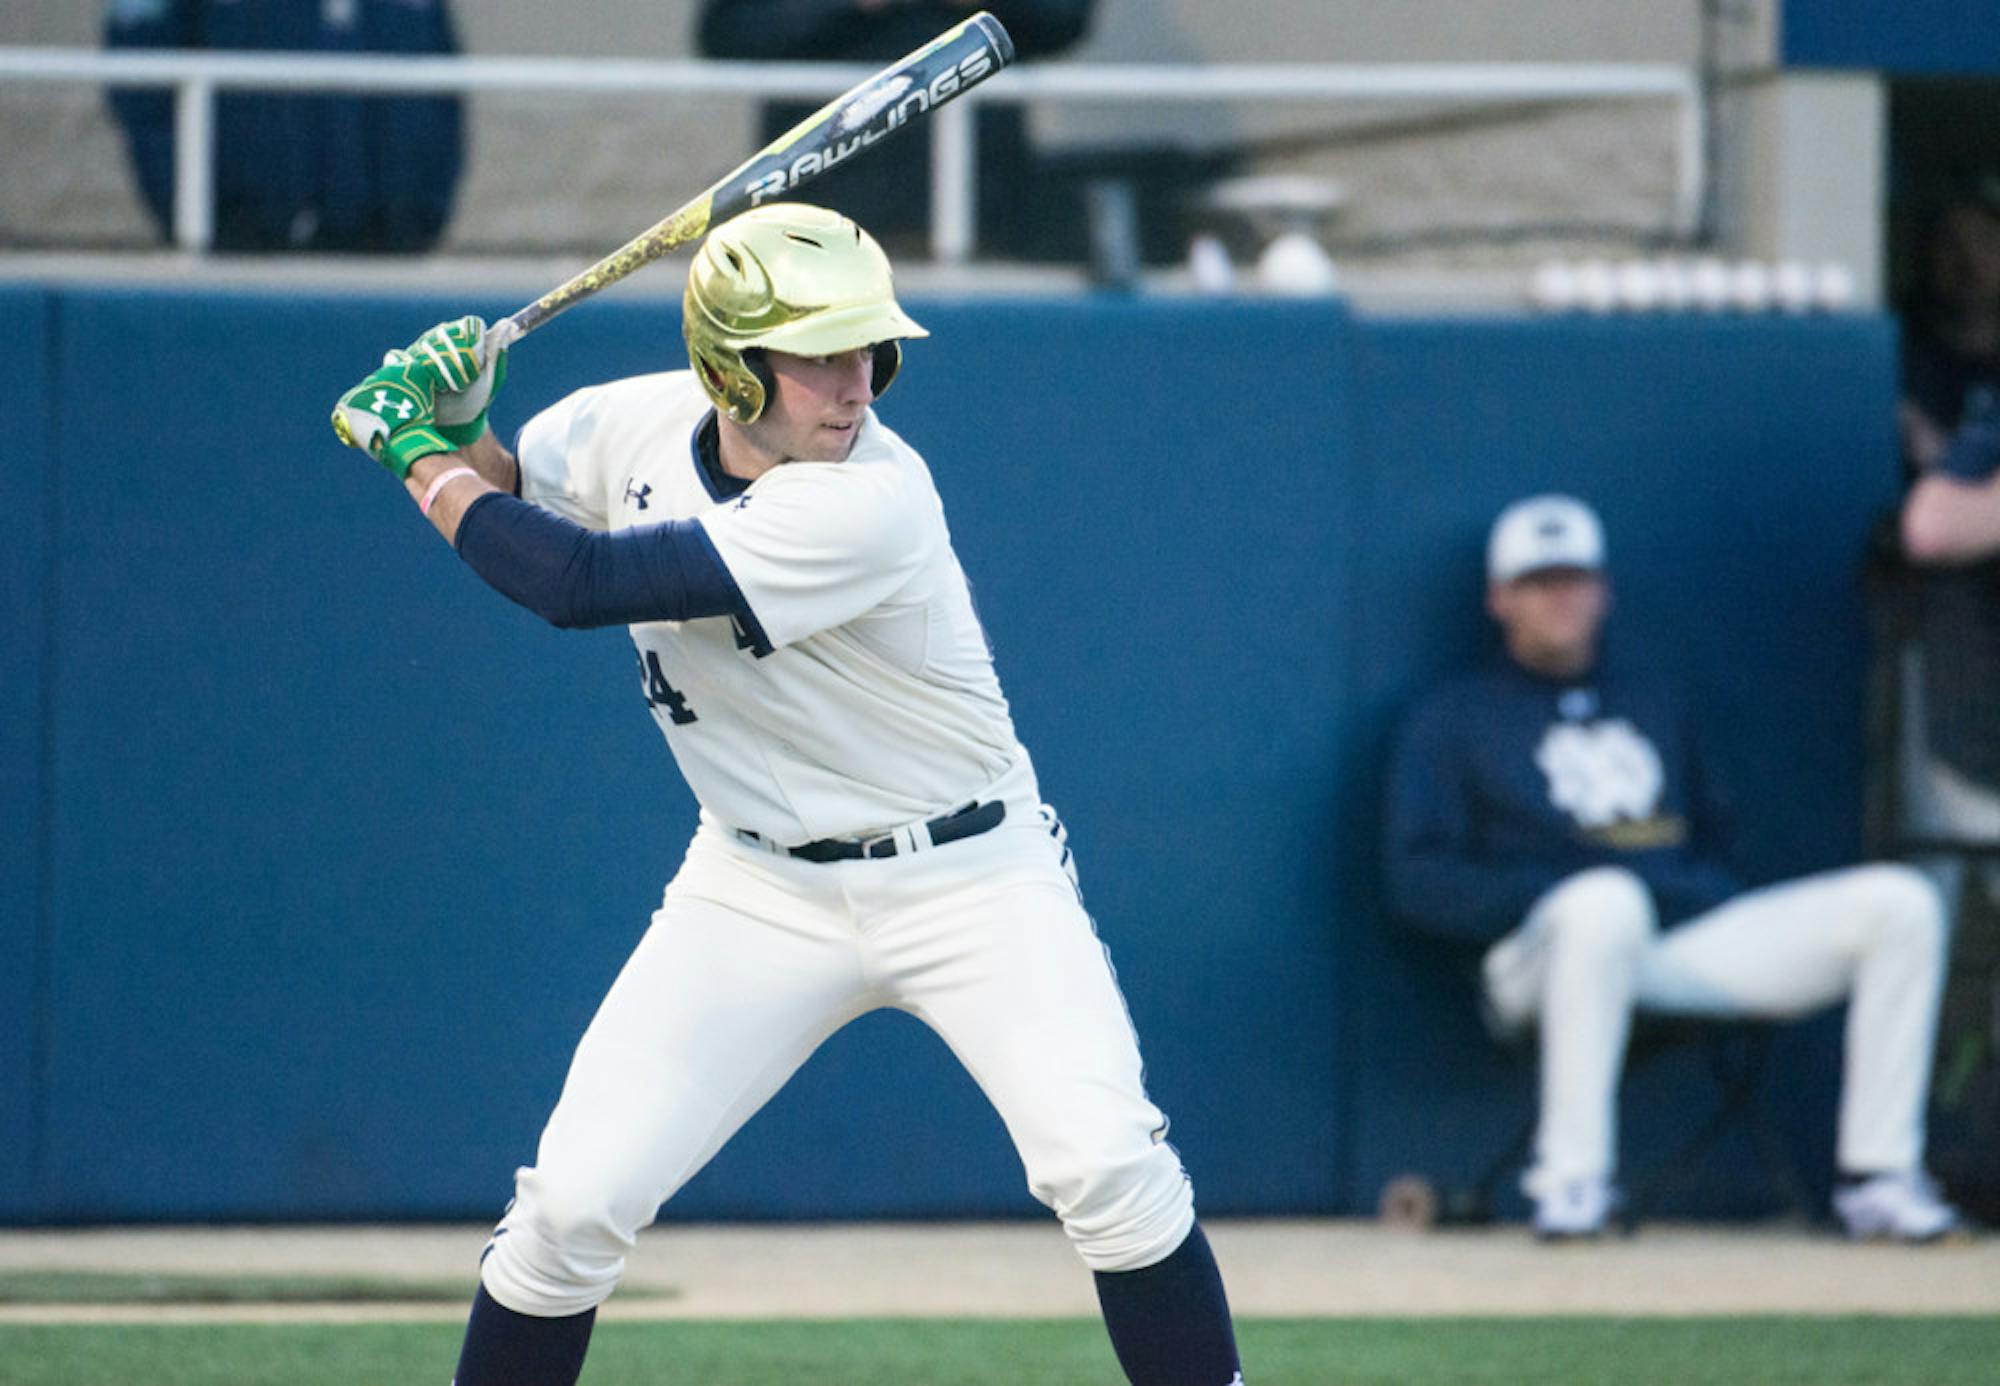 Irish sophomore outfielder Matt Vierling readies to swing during Notre Dame’s 8-3 win over Toledo on April 12.